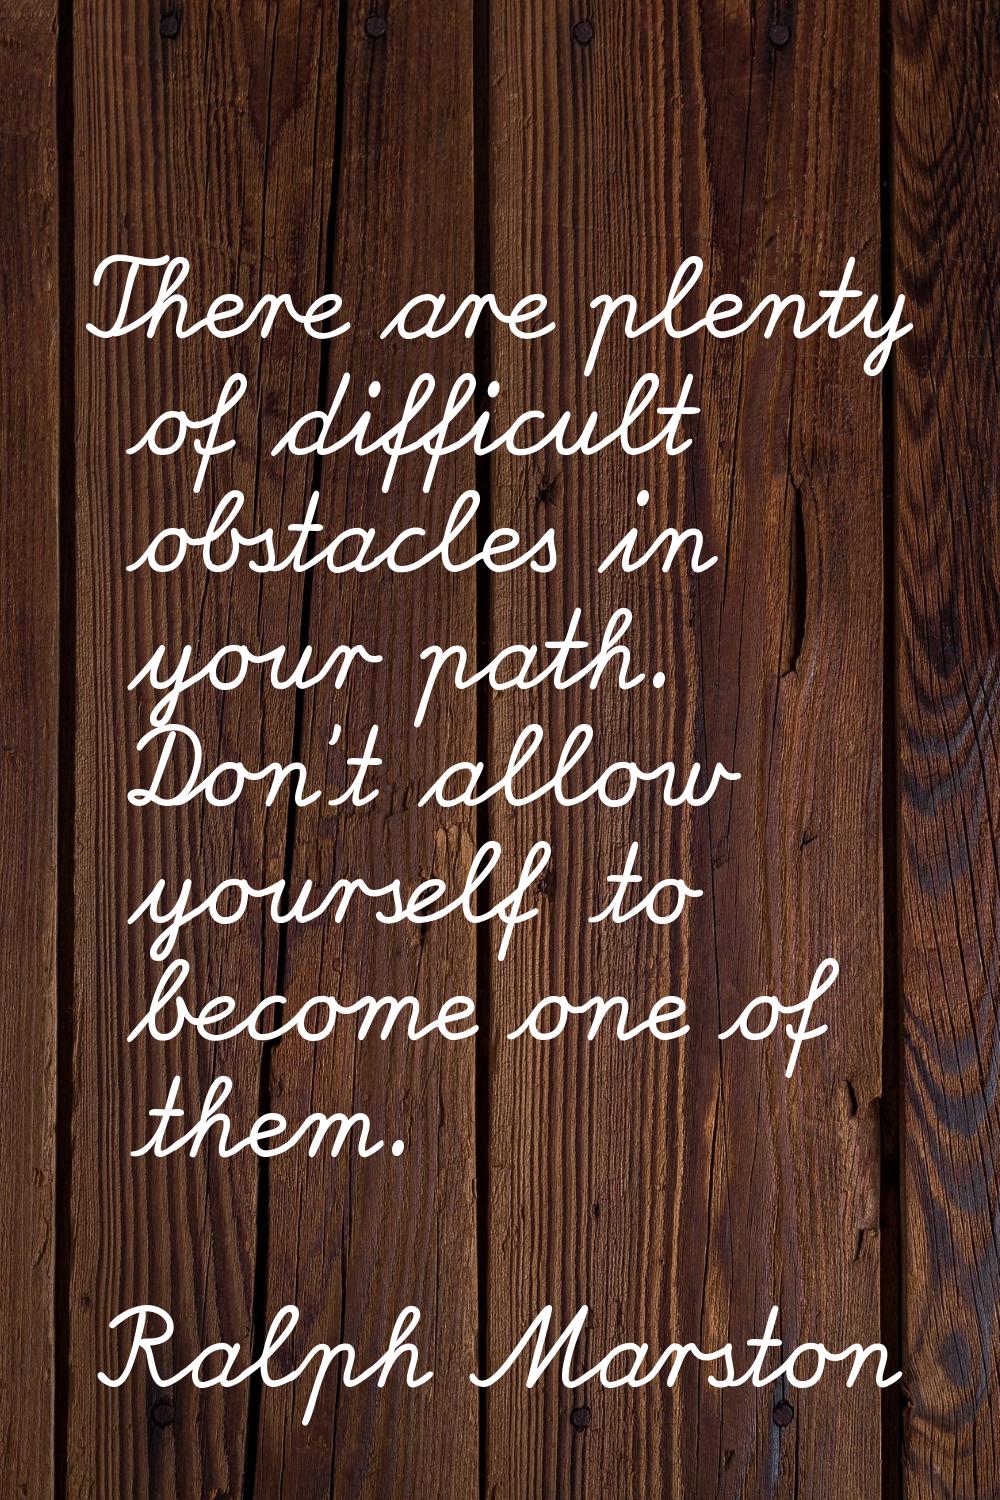 There are plenty of difficult obstacles in your path. Don't allow yourself to become one of them.